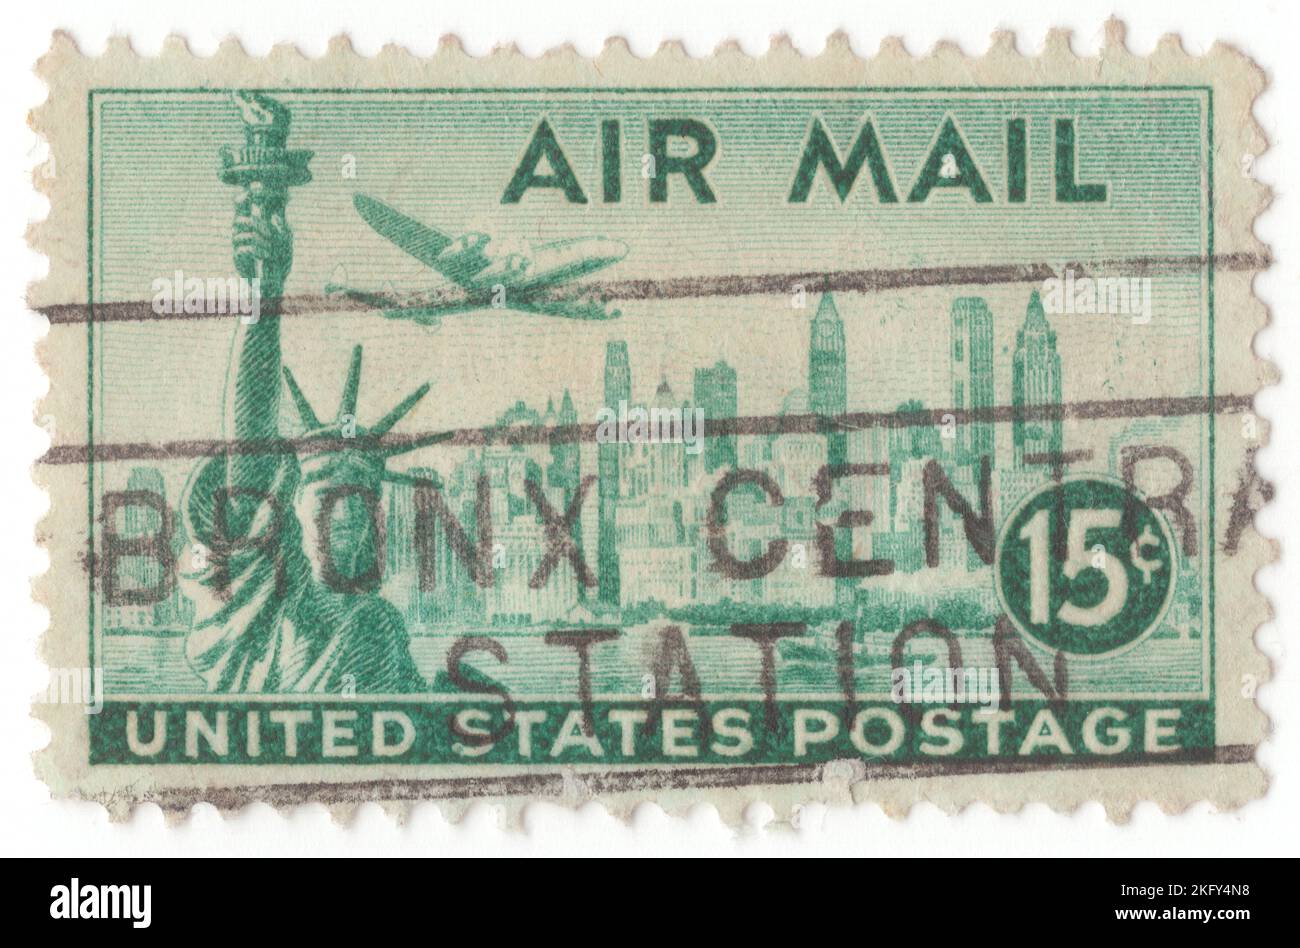 USA - 1947: An 15 cents bright blue-green Air Post stamp depicting Statue of Liberty and New York Skyline. For prepayment of postage on all mailable matter sent by airmail. Colossal neoclassical sculpture on Liberty Island in New York Harbor in New York City, in the United States. The copper statue, a gift from the people of France, was designed by French sculptor Frédéric Auguste Bartholdi and its metal framework was built by Gustave Eiffel. The statue was dedicated on October 28, 1886. The statue is a figure of Libertas, a robed Roman liberty goddess Stock Photo